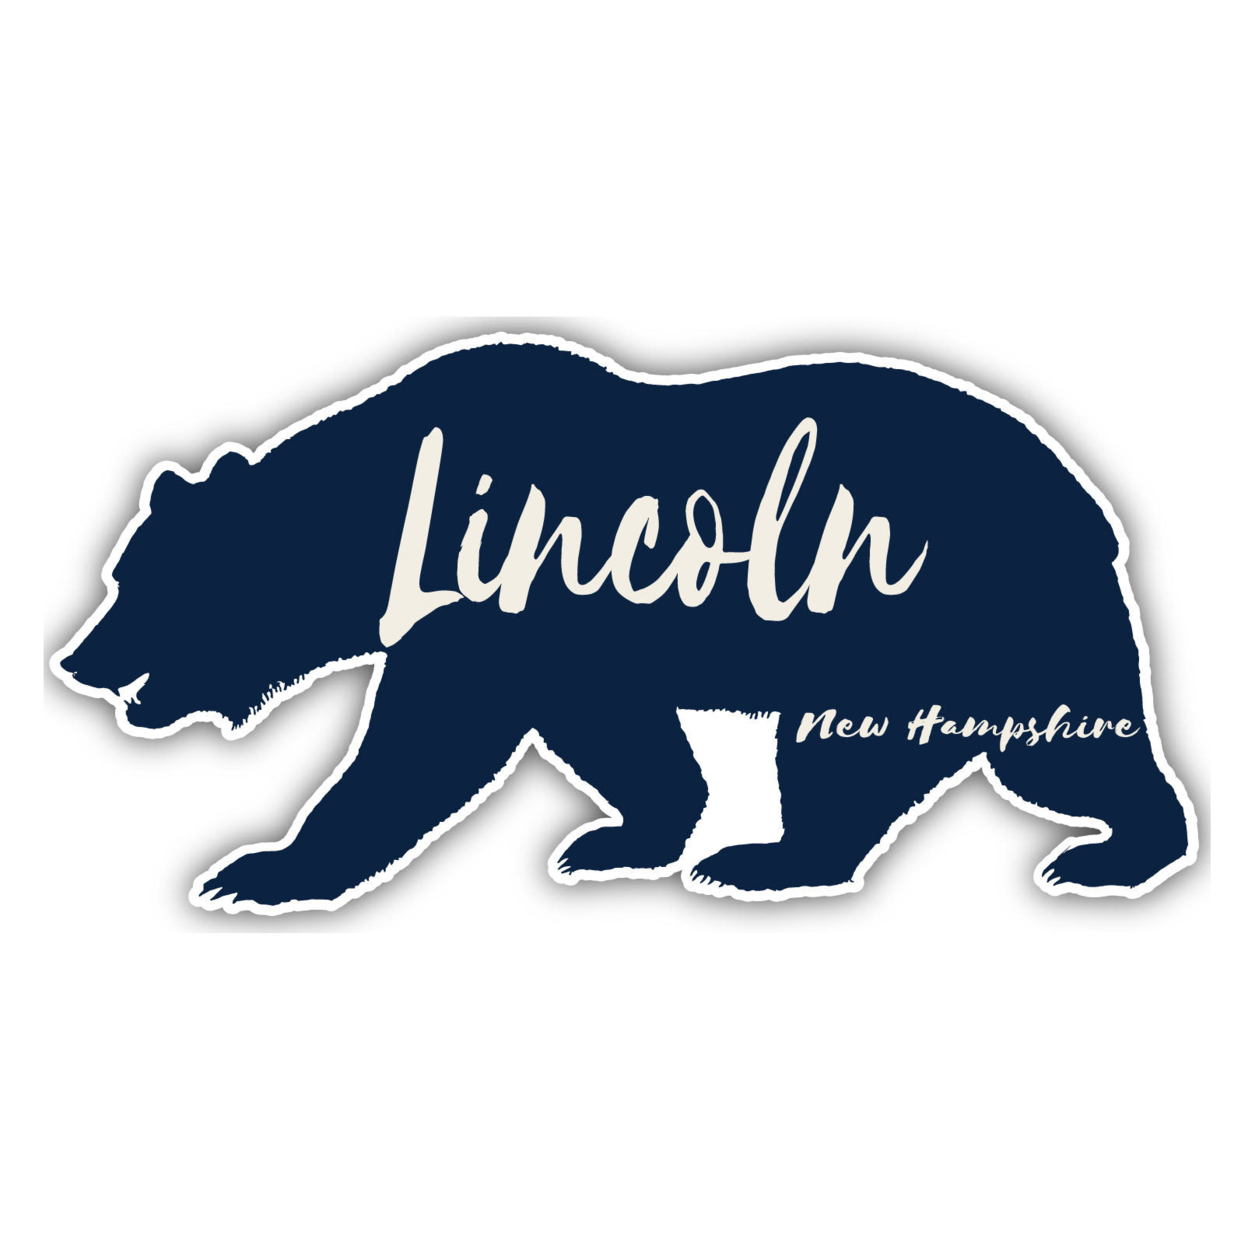 Lincoln New Hampshire Souvenir Decorative Stickers (Choose Theme And Size) - 2-Inch, Tent